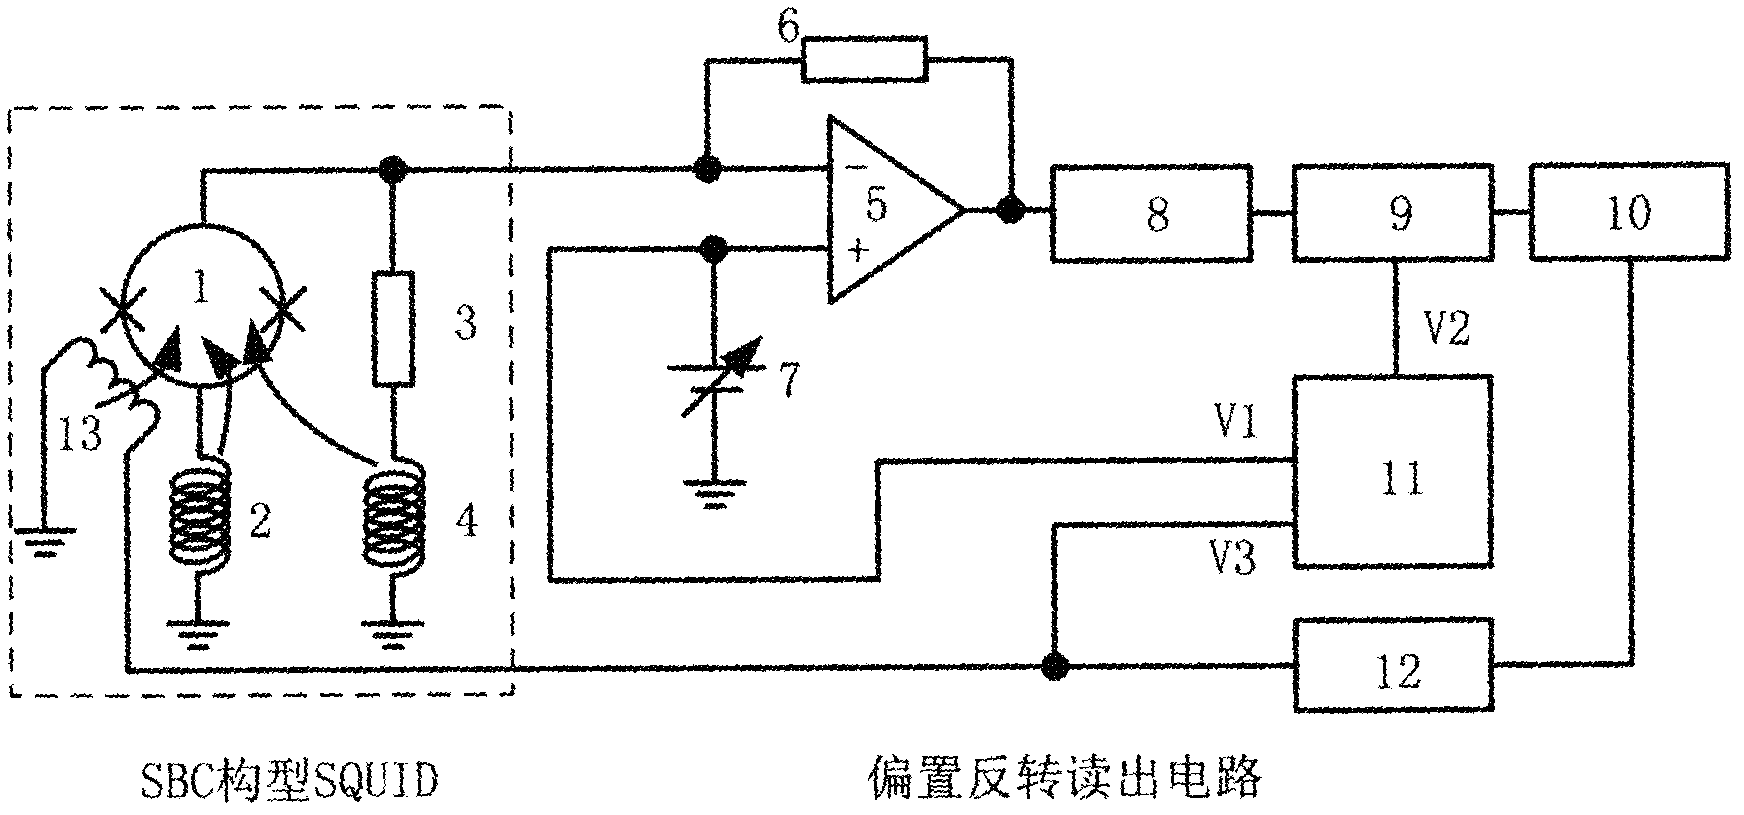 Readout circuit based on SQUID (Superconducting Quantum Interference Device) offset voltage reversal and method for inhibiting low-frequency noises